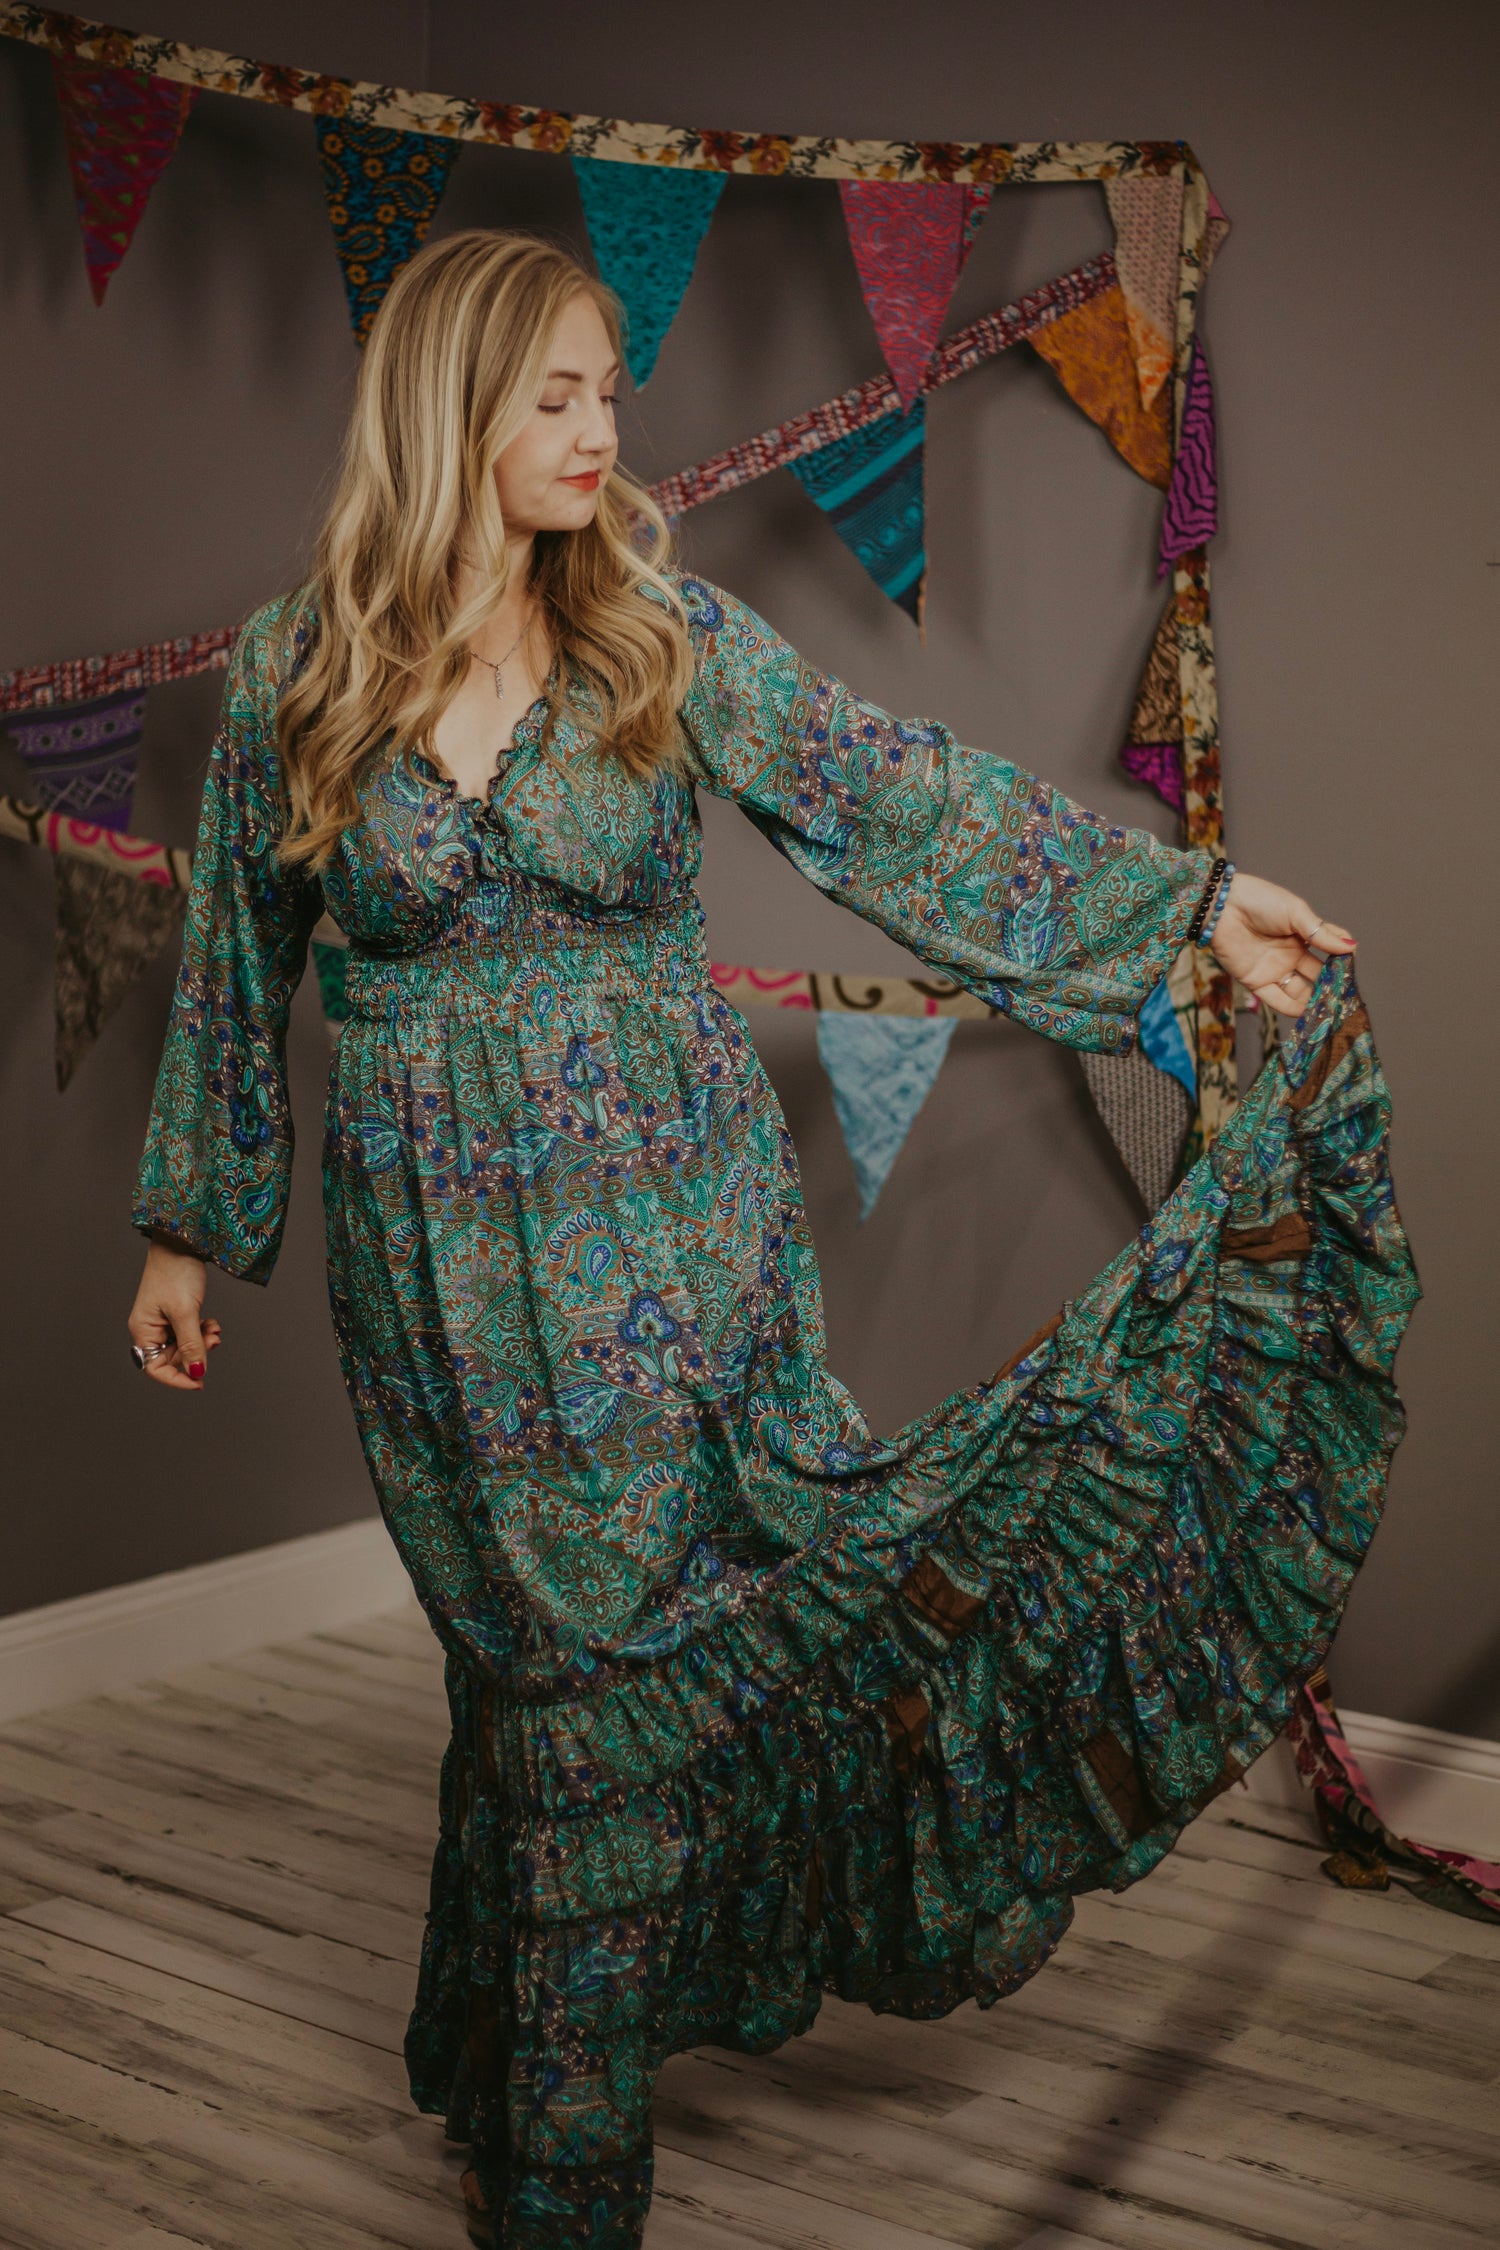 Woman wearing a teal and brown maxi dress